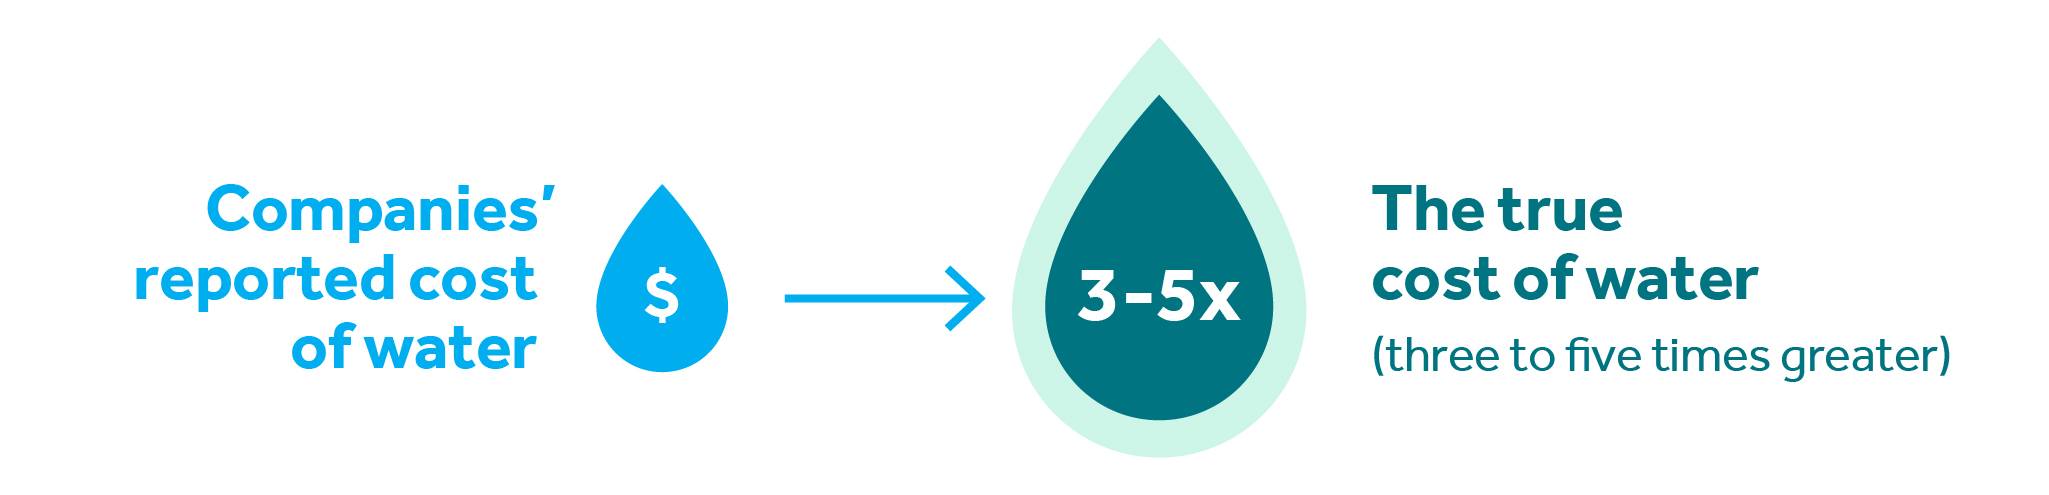 A cyan water droplet representing what companies report as the cost of water sits next to a larger green water droplet representing what Barclays Research calculated the true cost of water to be